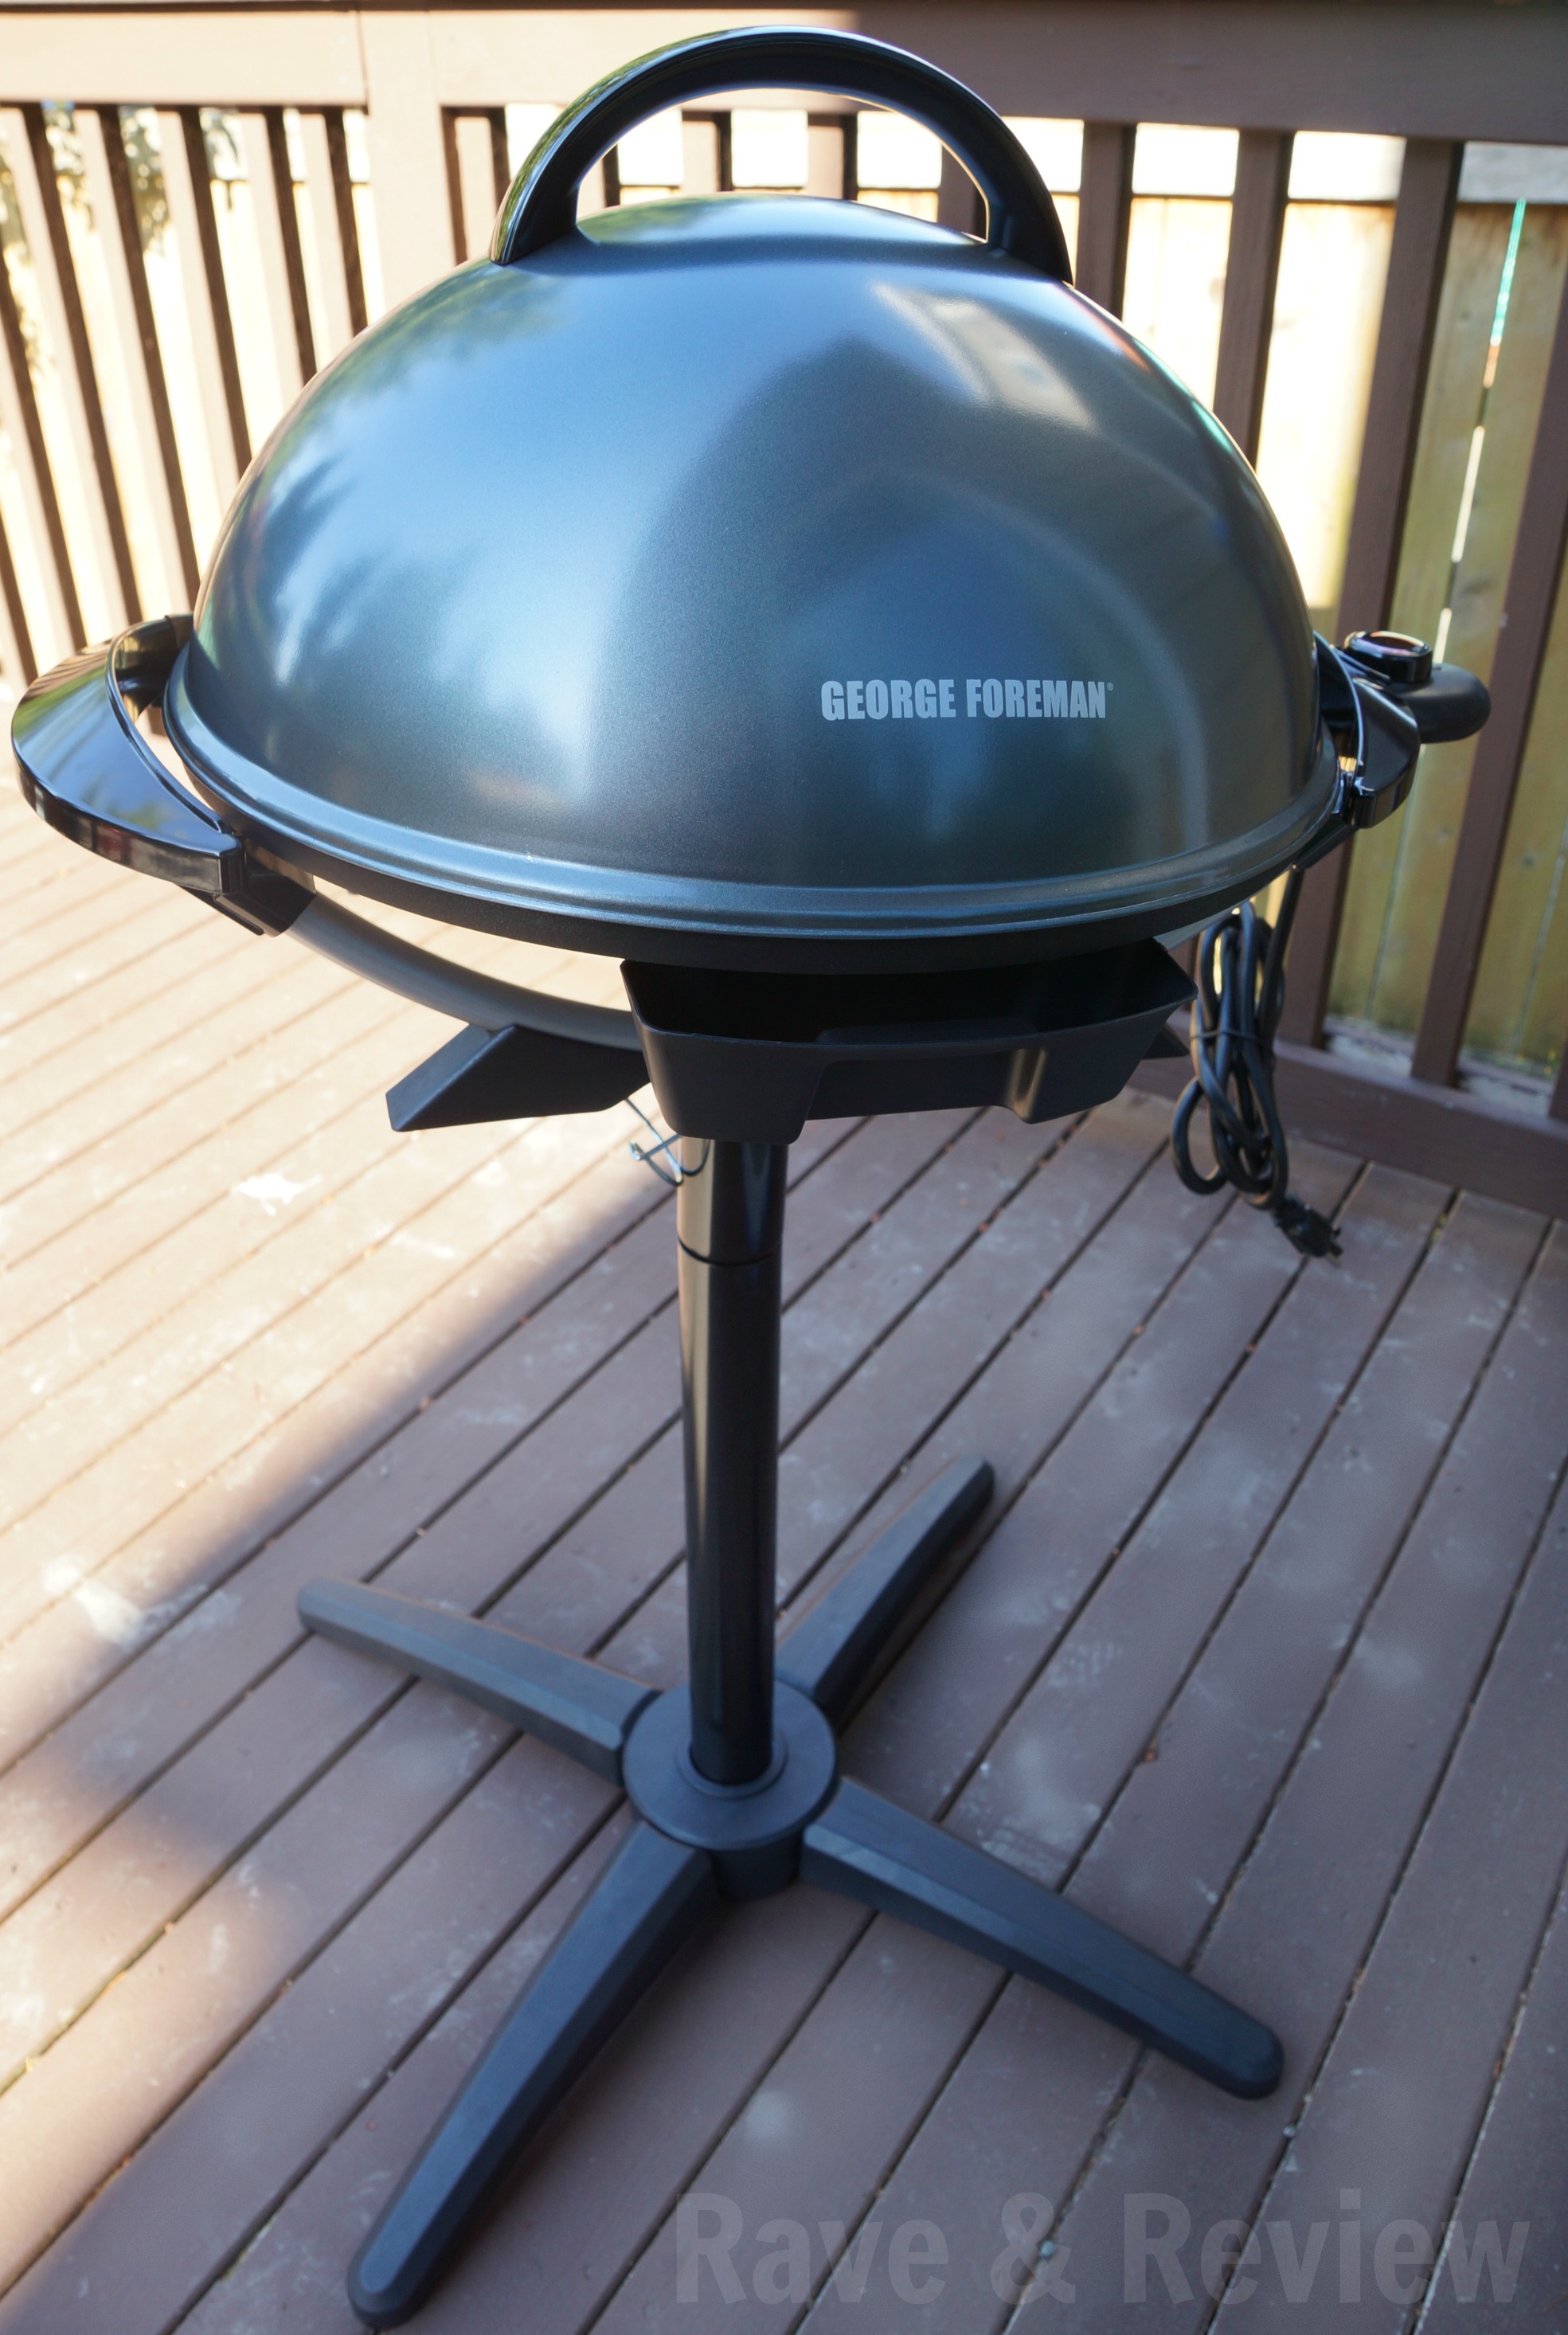 Make BBQ season last all year with 2-in-1 healthy grilling indoors or out  from George Foreman - Rave & Review